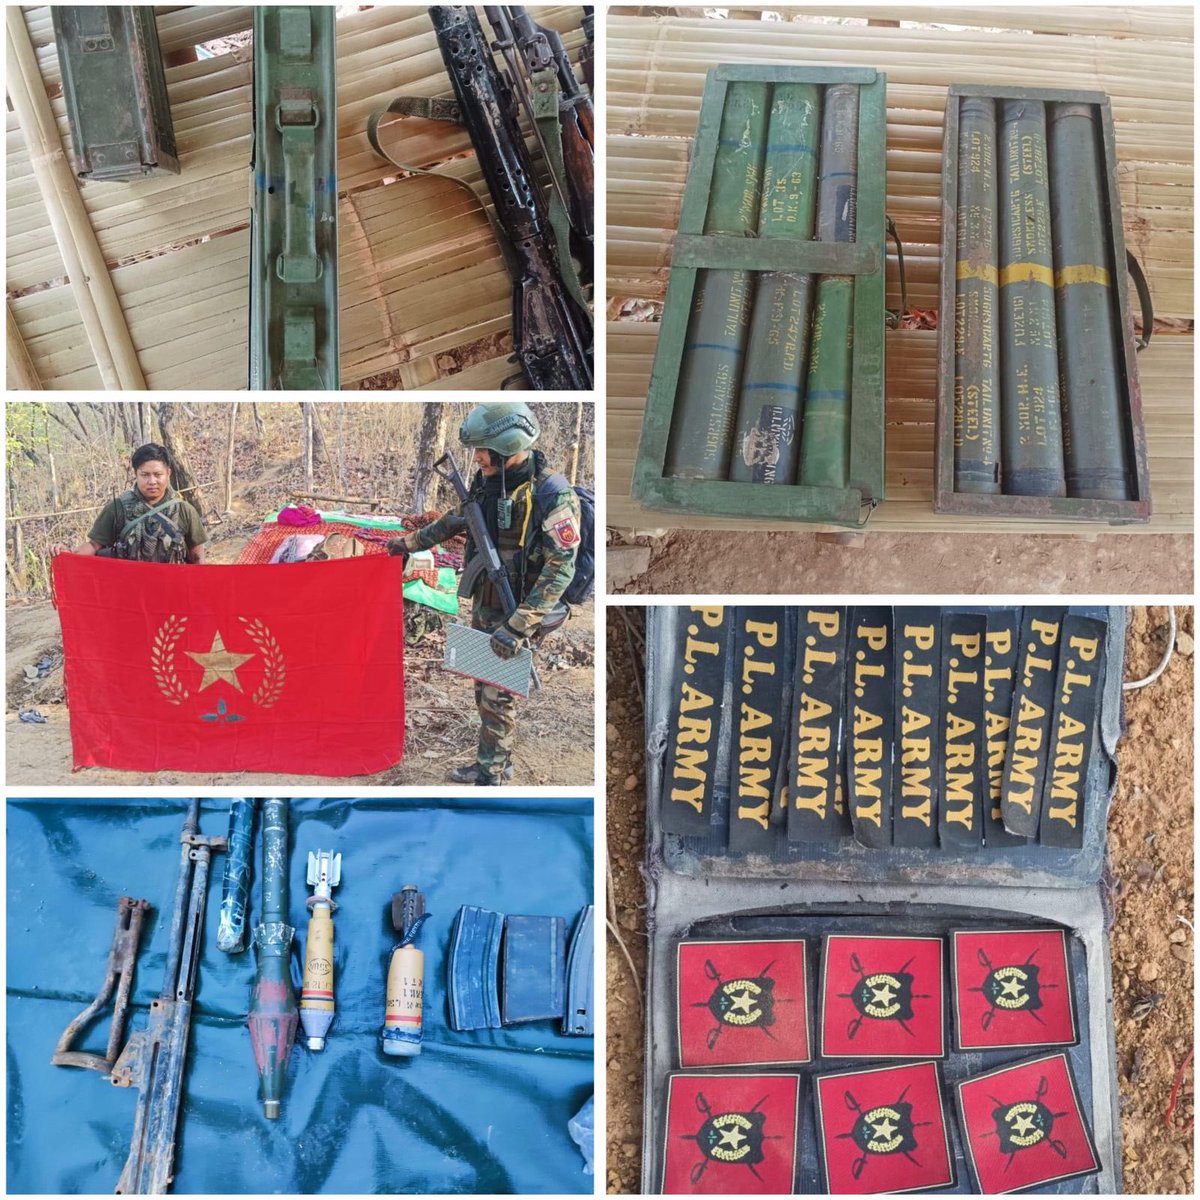 Combined PDF, KNA(B), and KIA teams clashed with PLA and UNLF in Myothit, Myanmar for the past few days. Recovered arms and explosives raise questions on Manipur government's involvement.